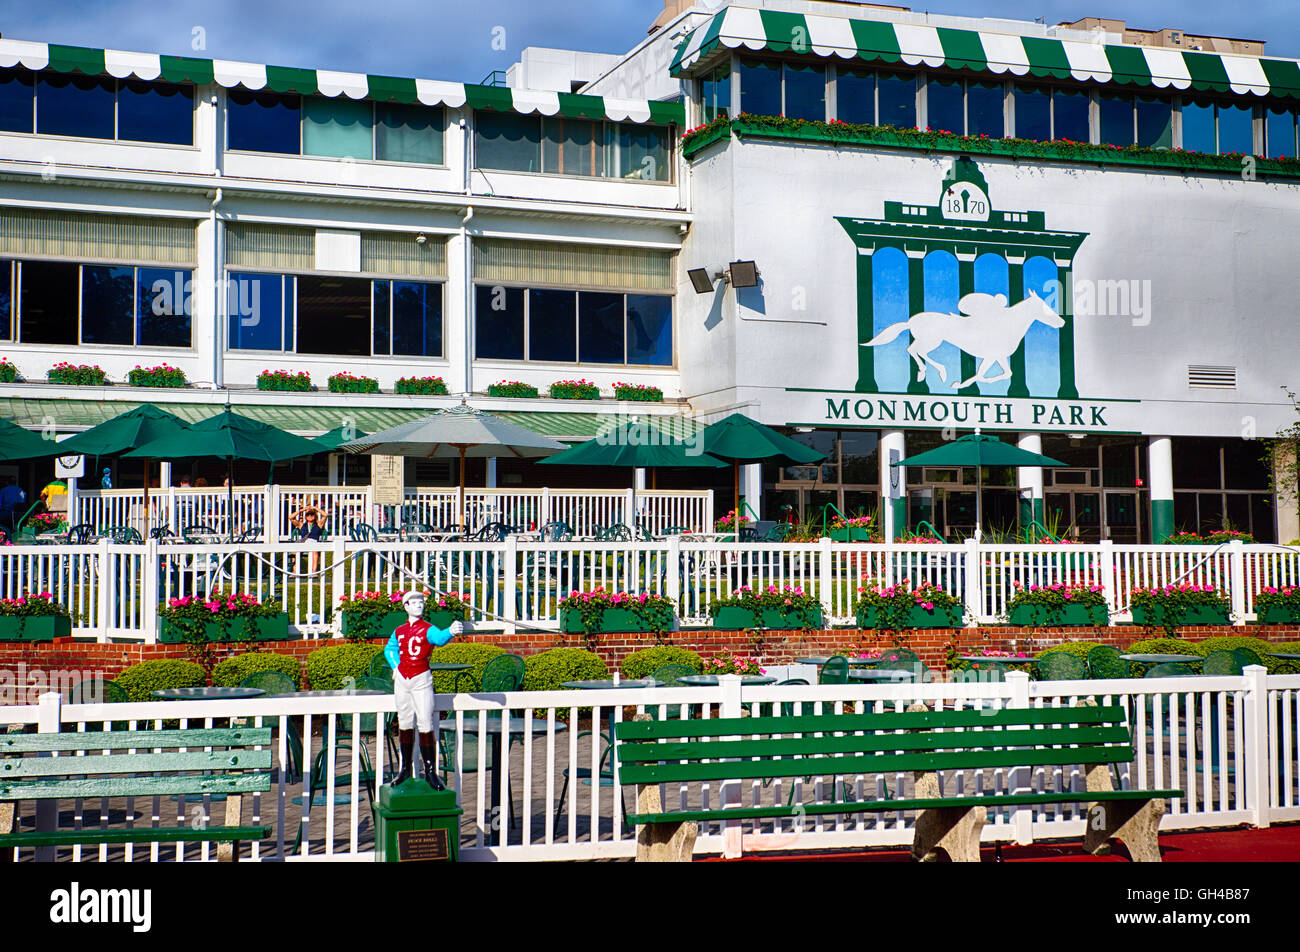 Low Angle Frontal View of the Monmouth Park Racetrack Main Pavilion, Oceanpark, New Jersey Stock Photo